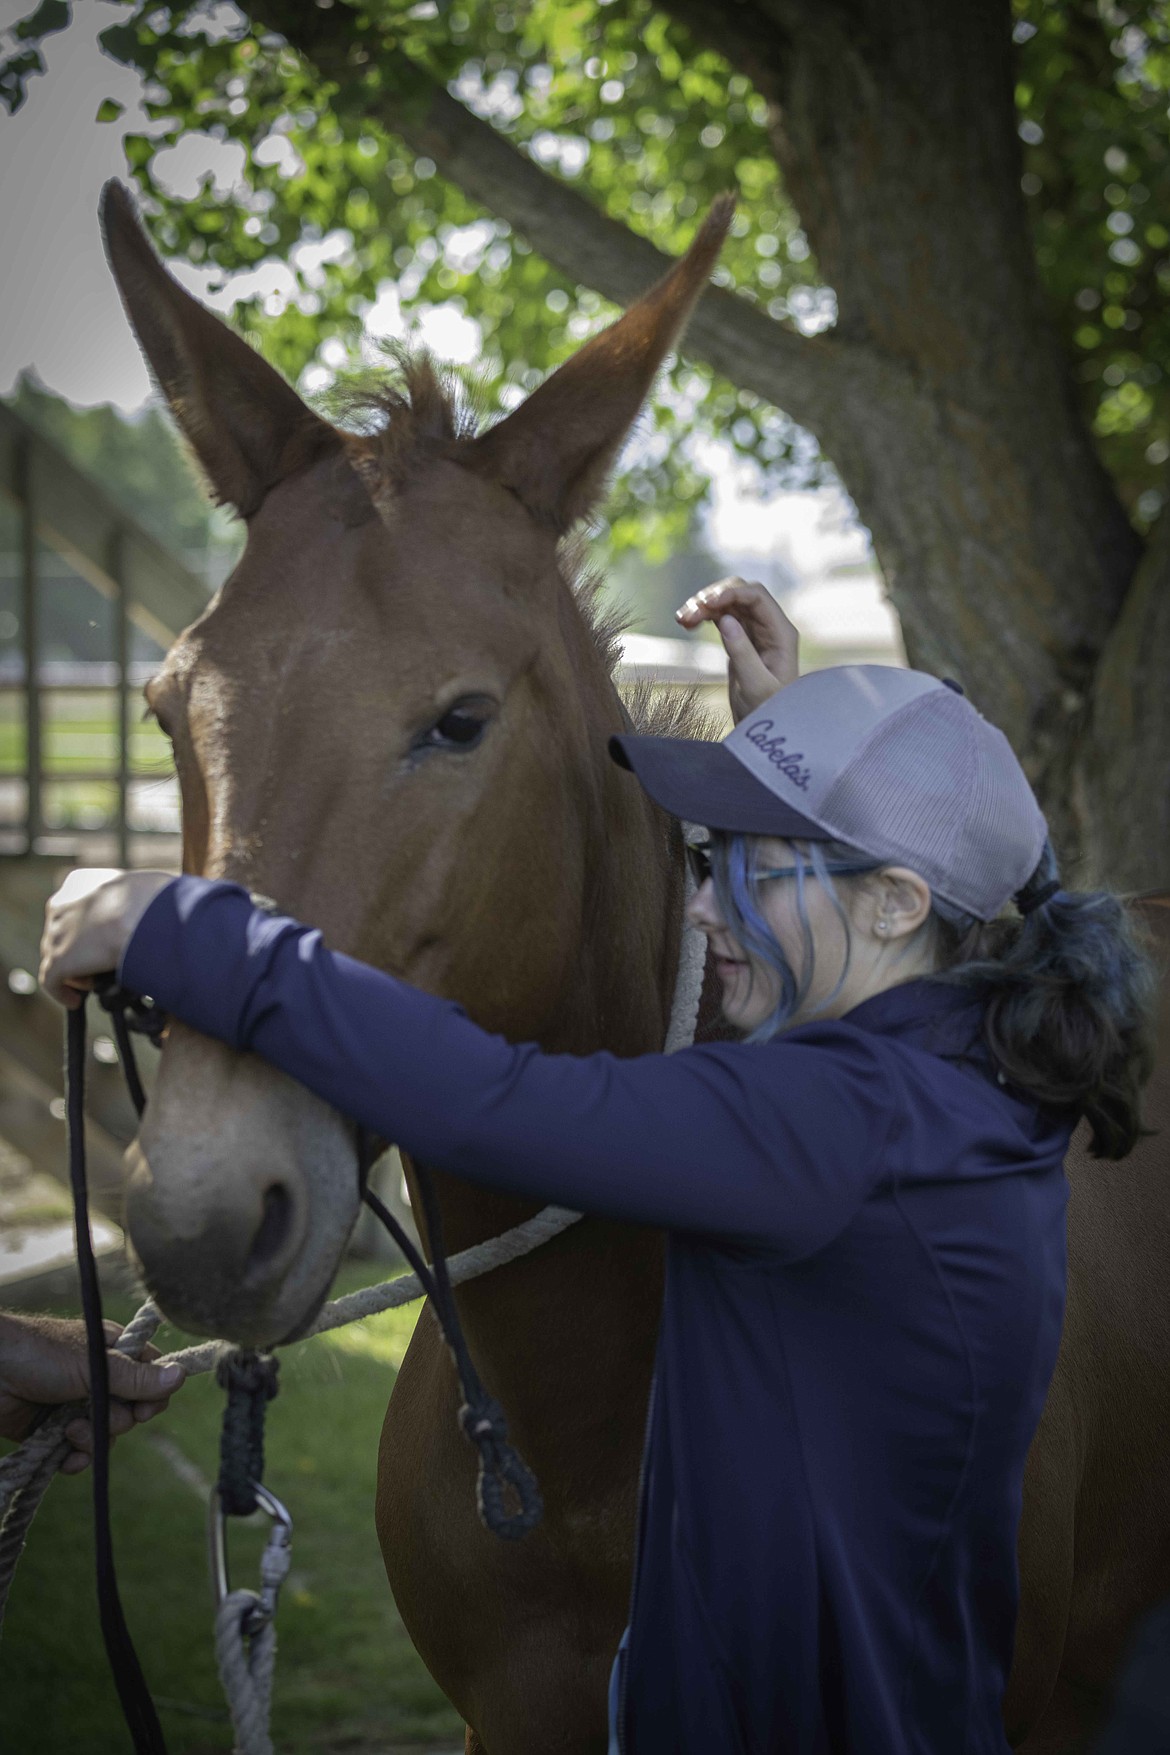 16-year-old Sam Burcham attempts to put a harness on a mule. (Tracy Scott/Valley Press)